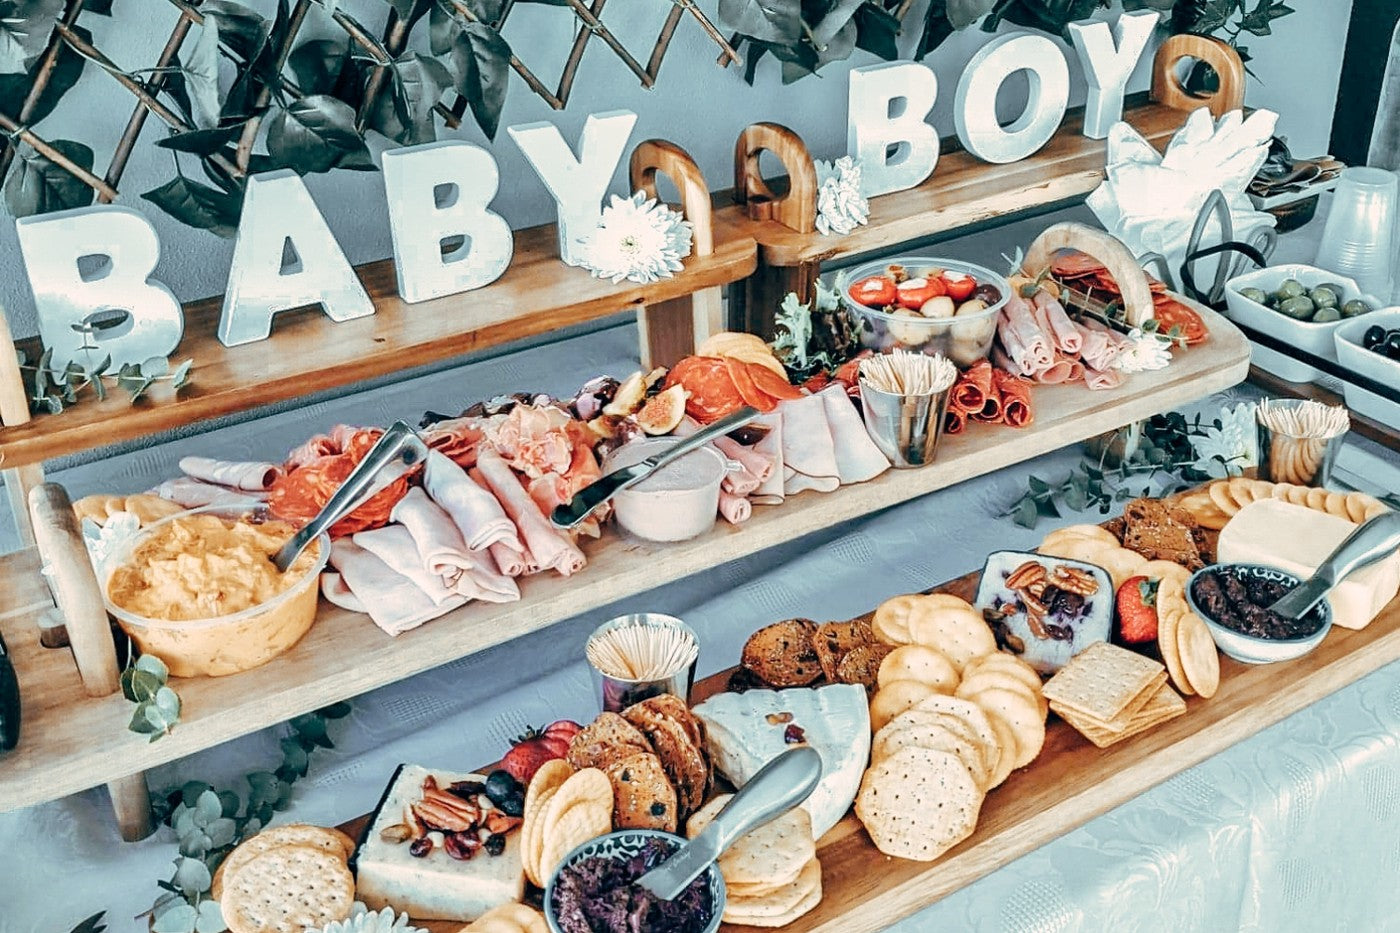 Catering food ideas for baby showers